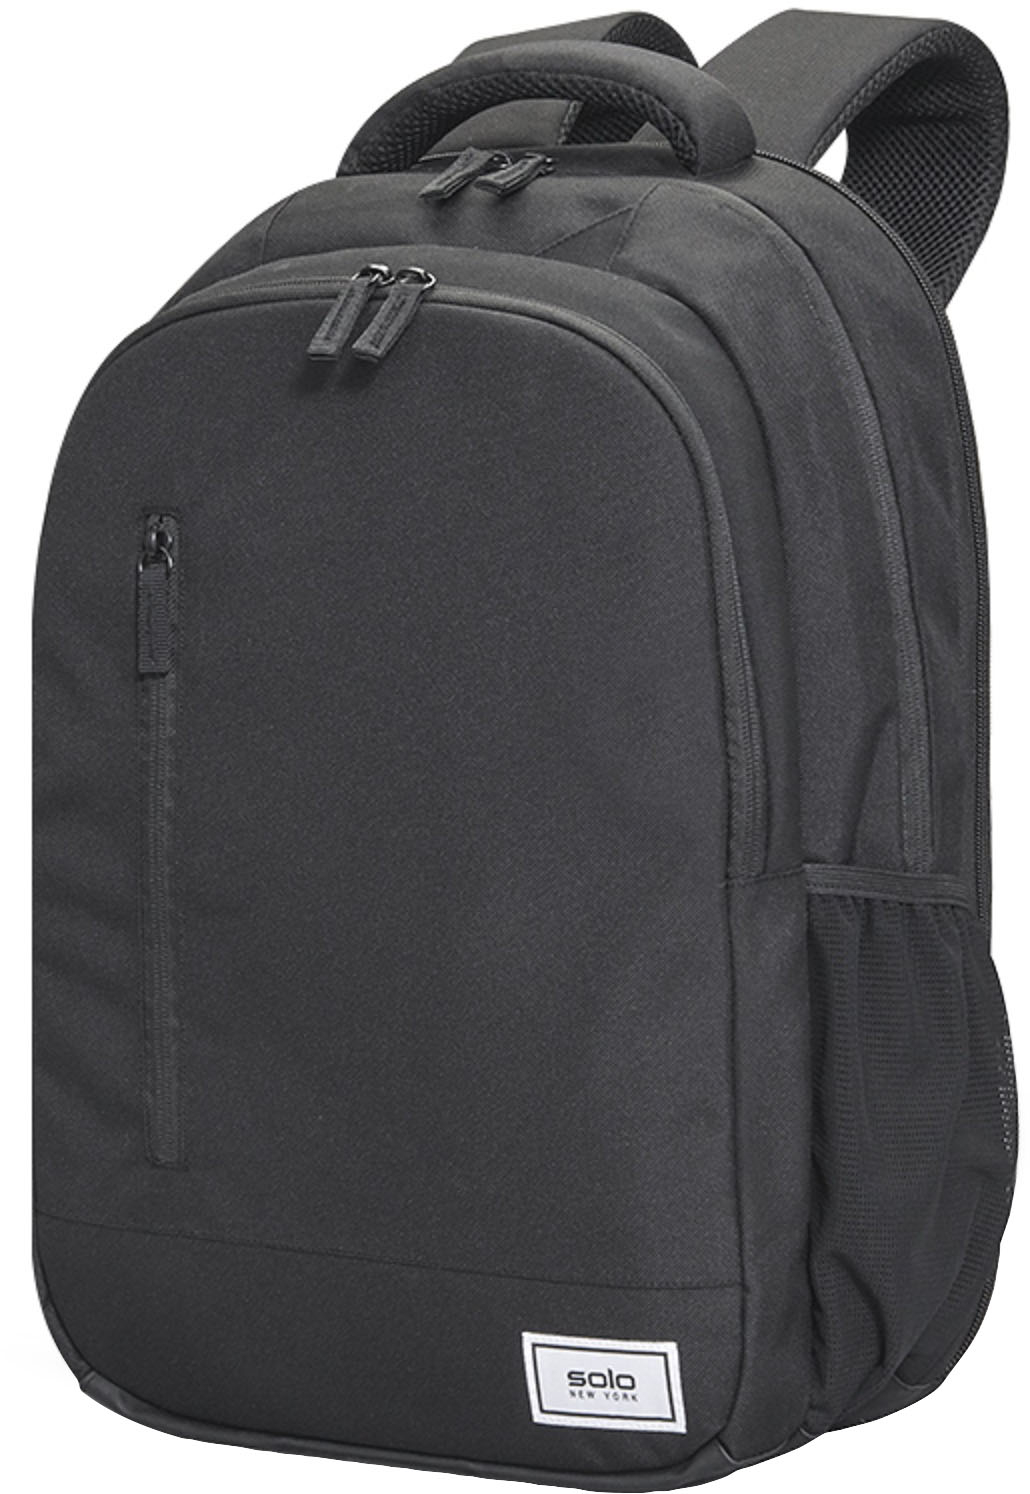 Solo New York Re:Define Recycled Backpack Black UBN708-4 - Best